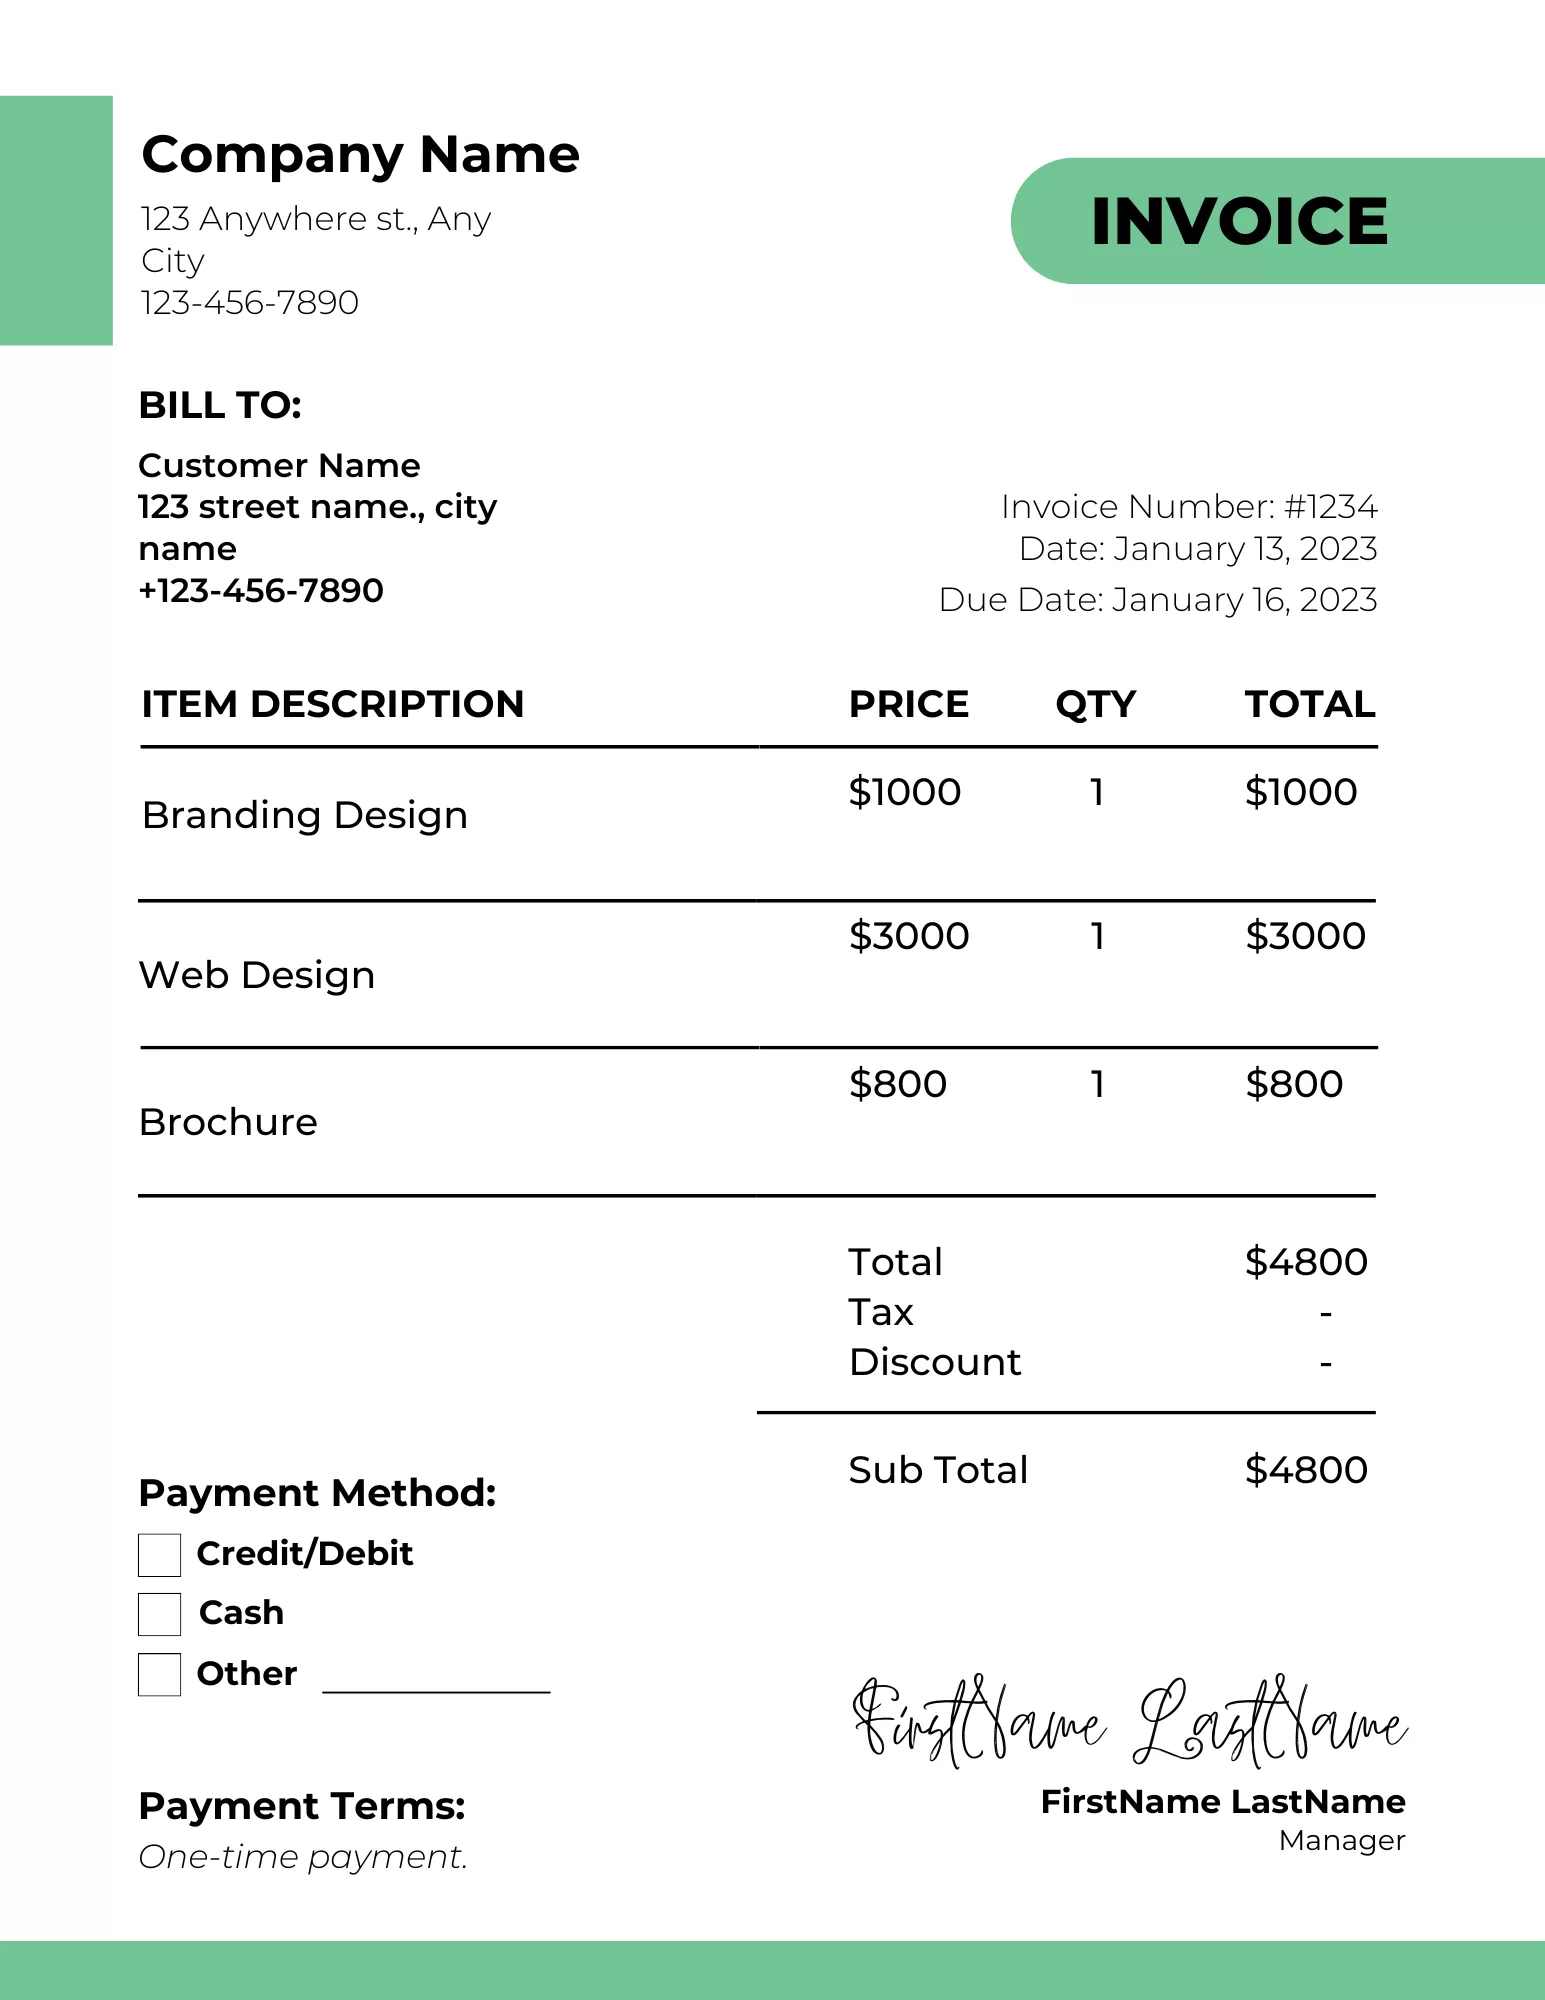 a document showing an invoice example and includes everything you need in an invoice